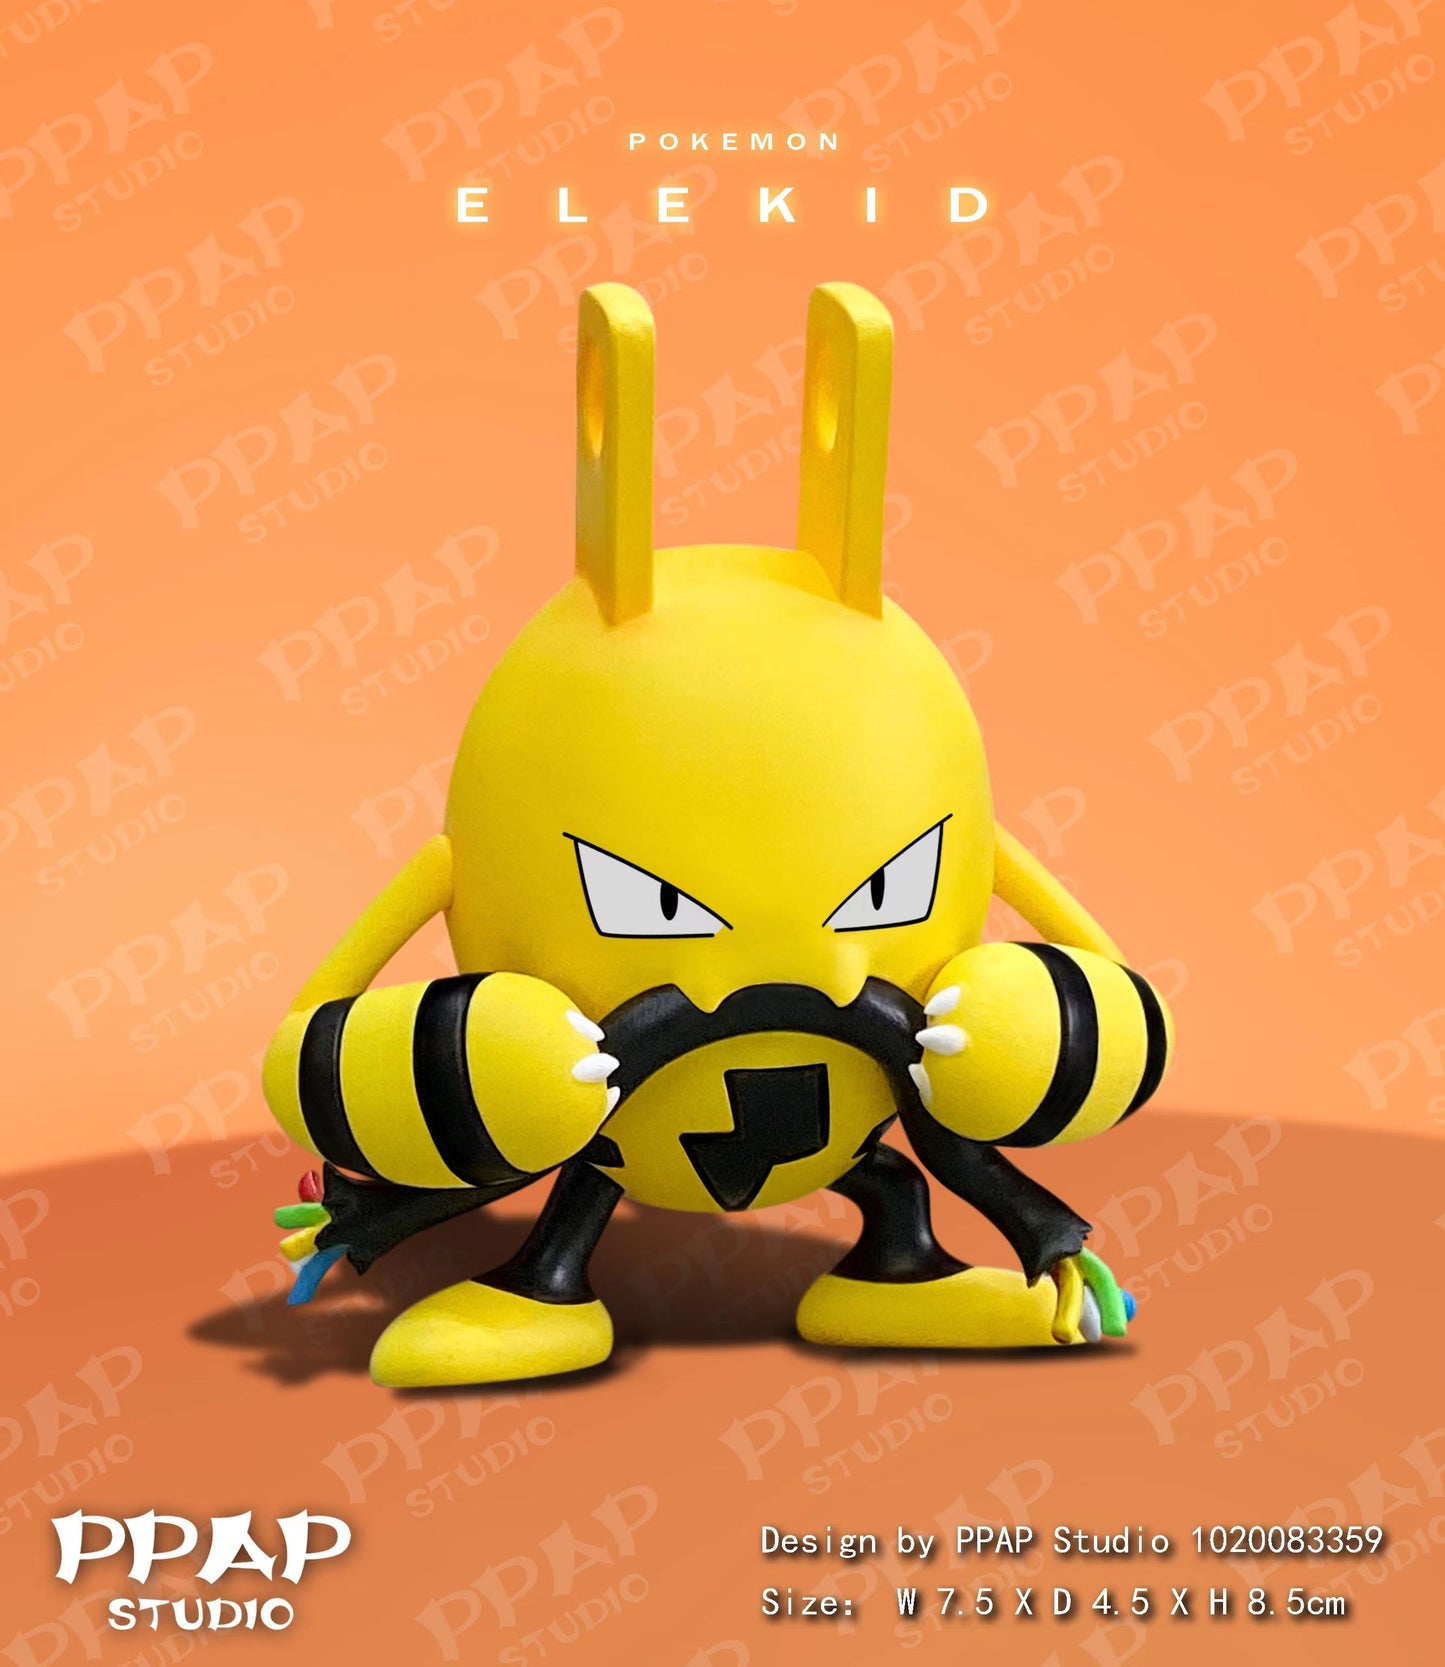 〖Sold Out〗Pokémon Peripheral Products Elekid - PPAP Studio